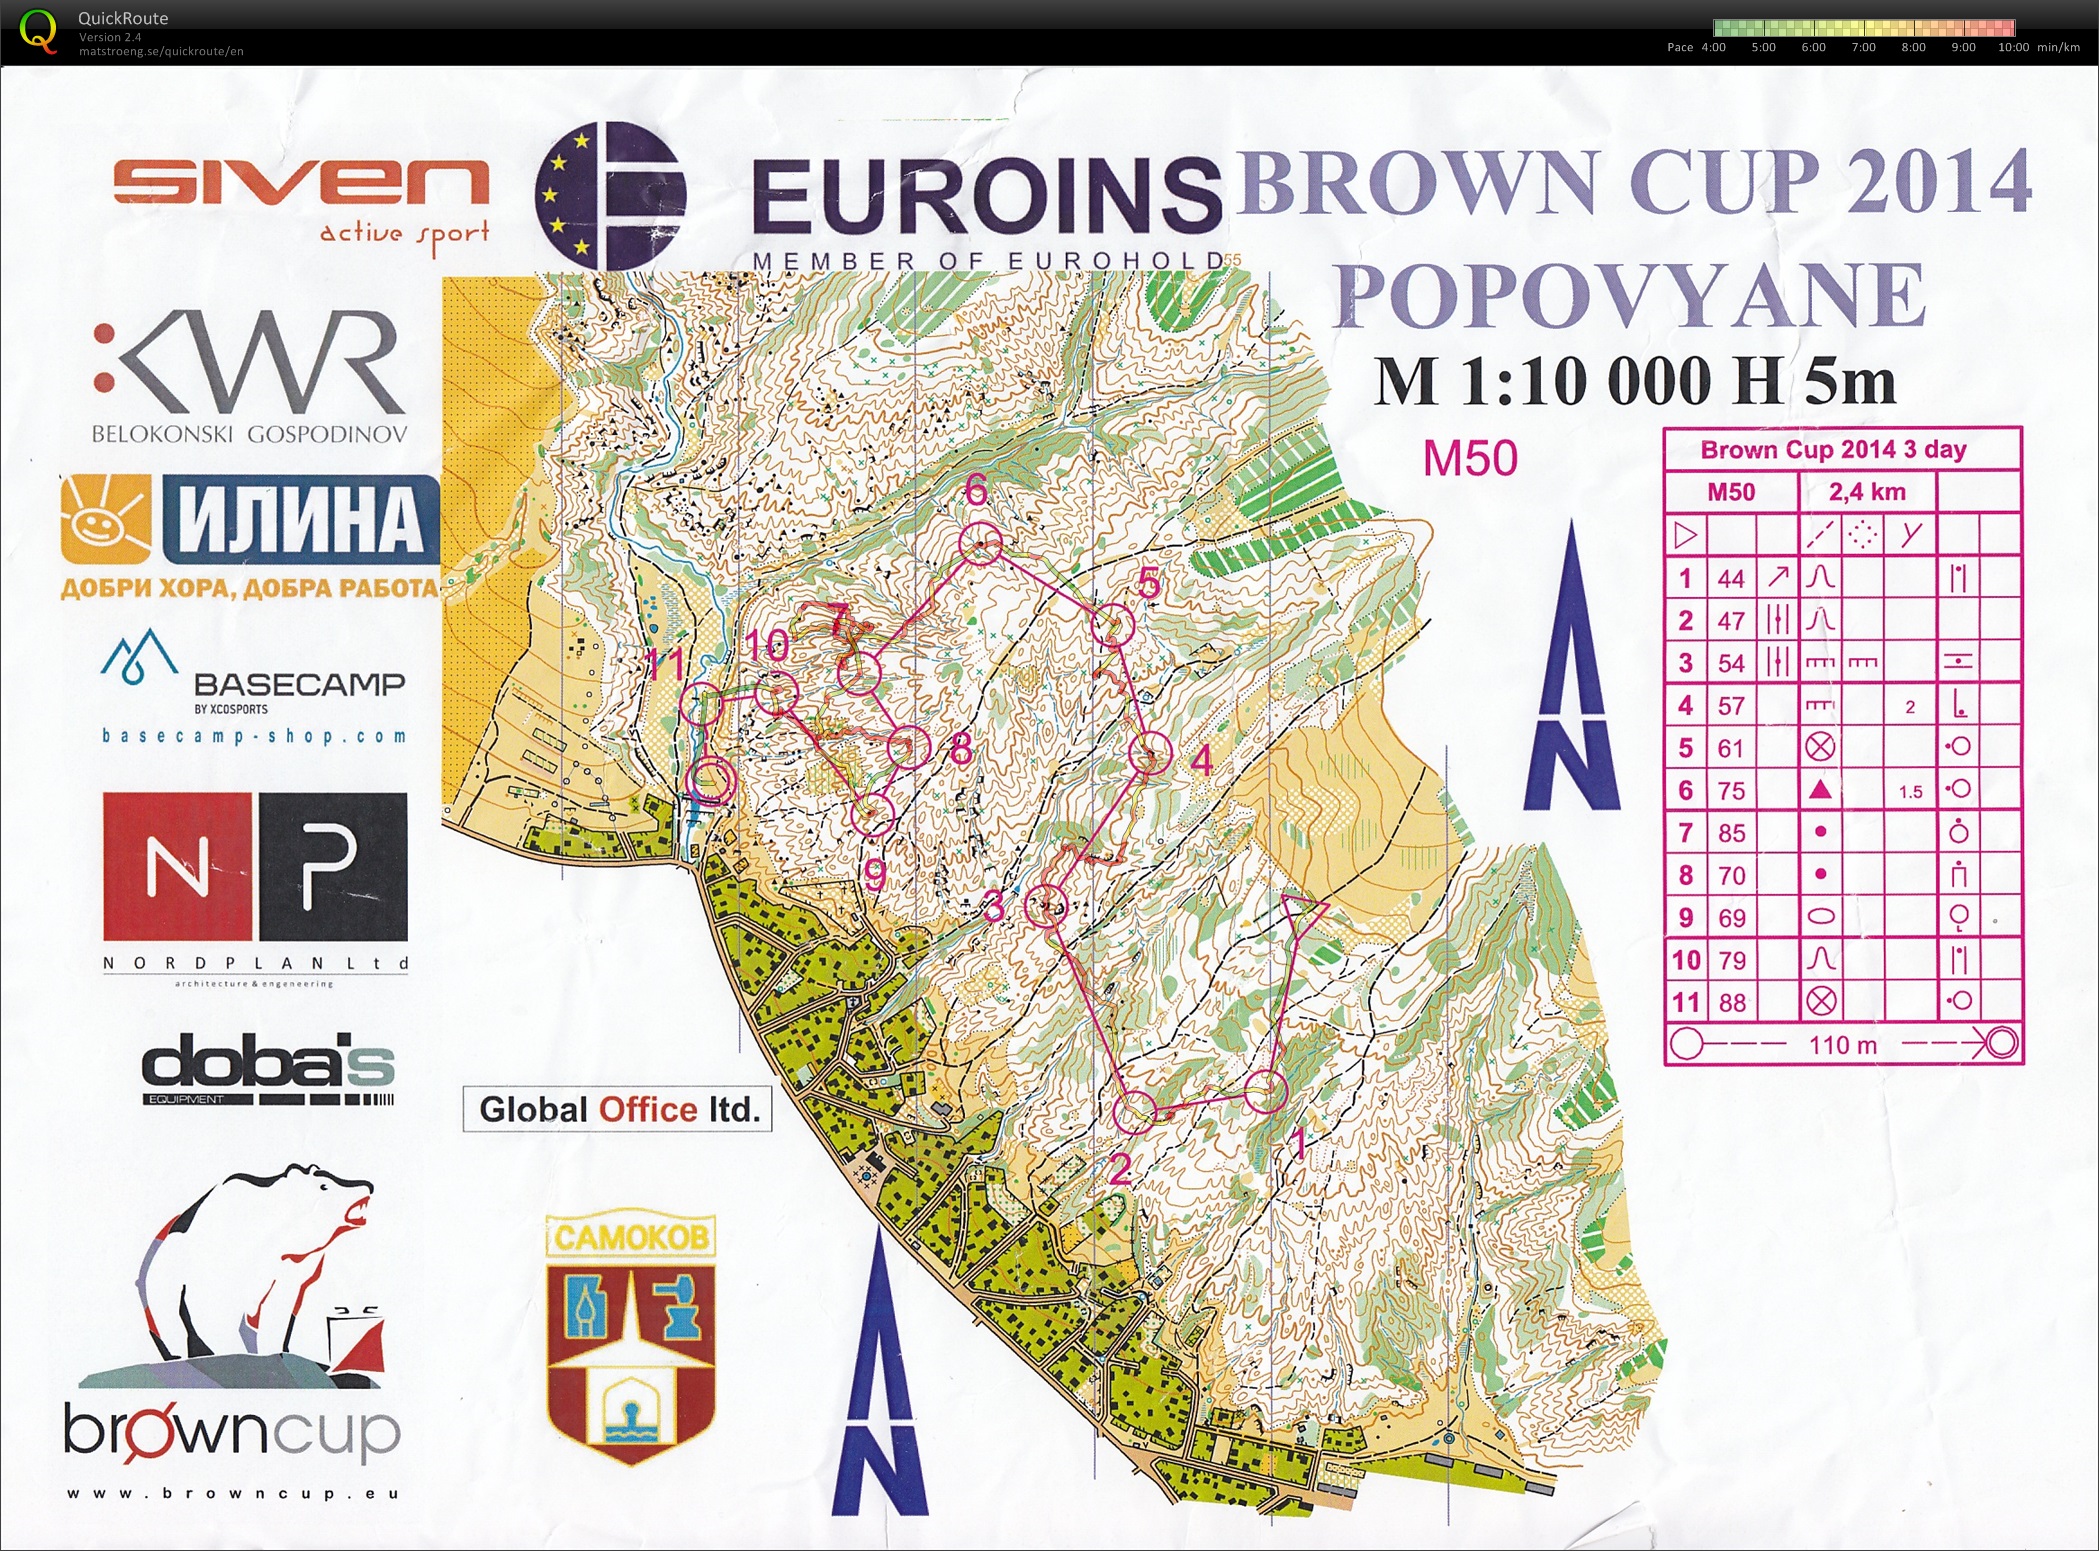 Brown-Cup 2014 E3 (05.05.2014)